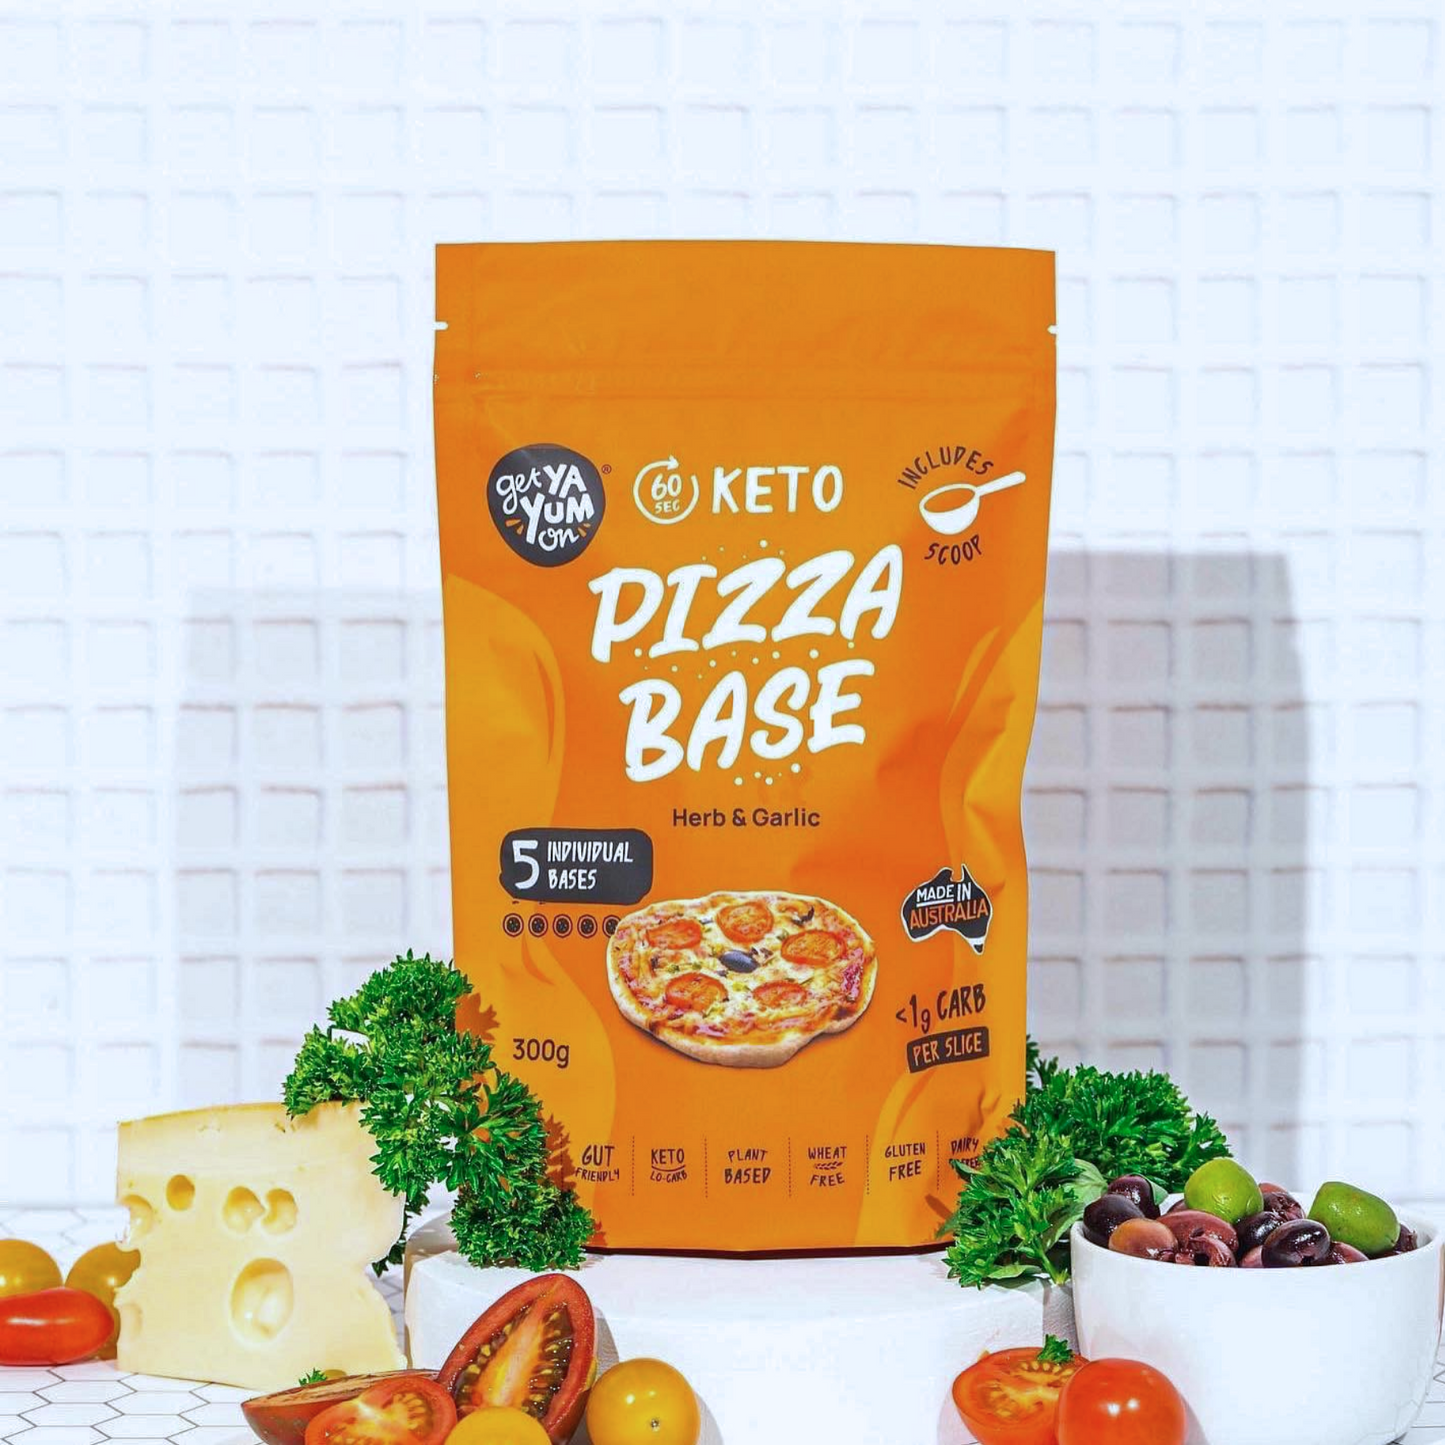 IN STORE ONLY - Keto Pizza Making Kit – Wholesome Keto Treats